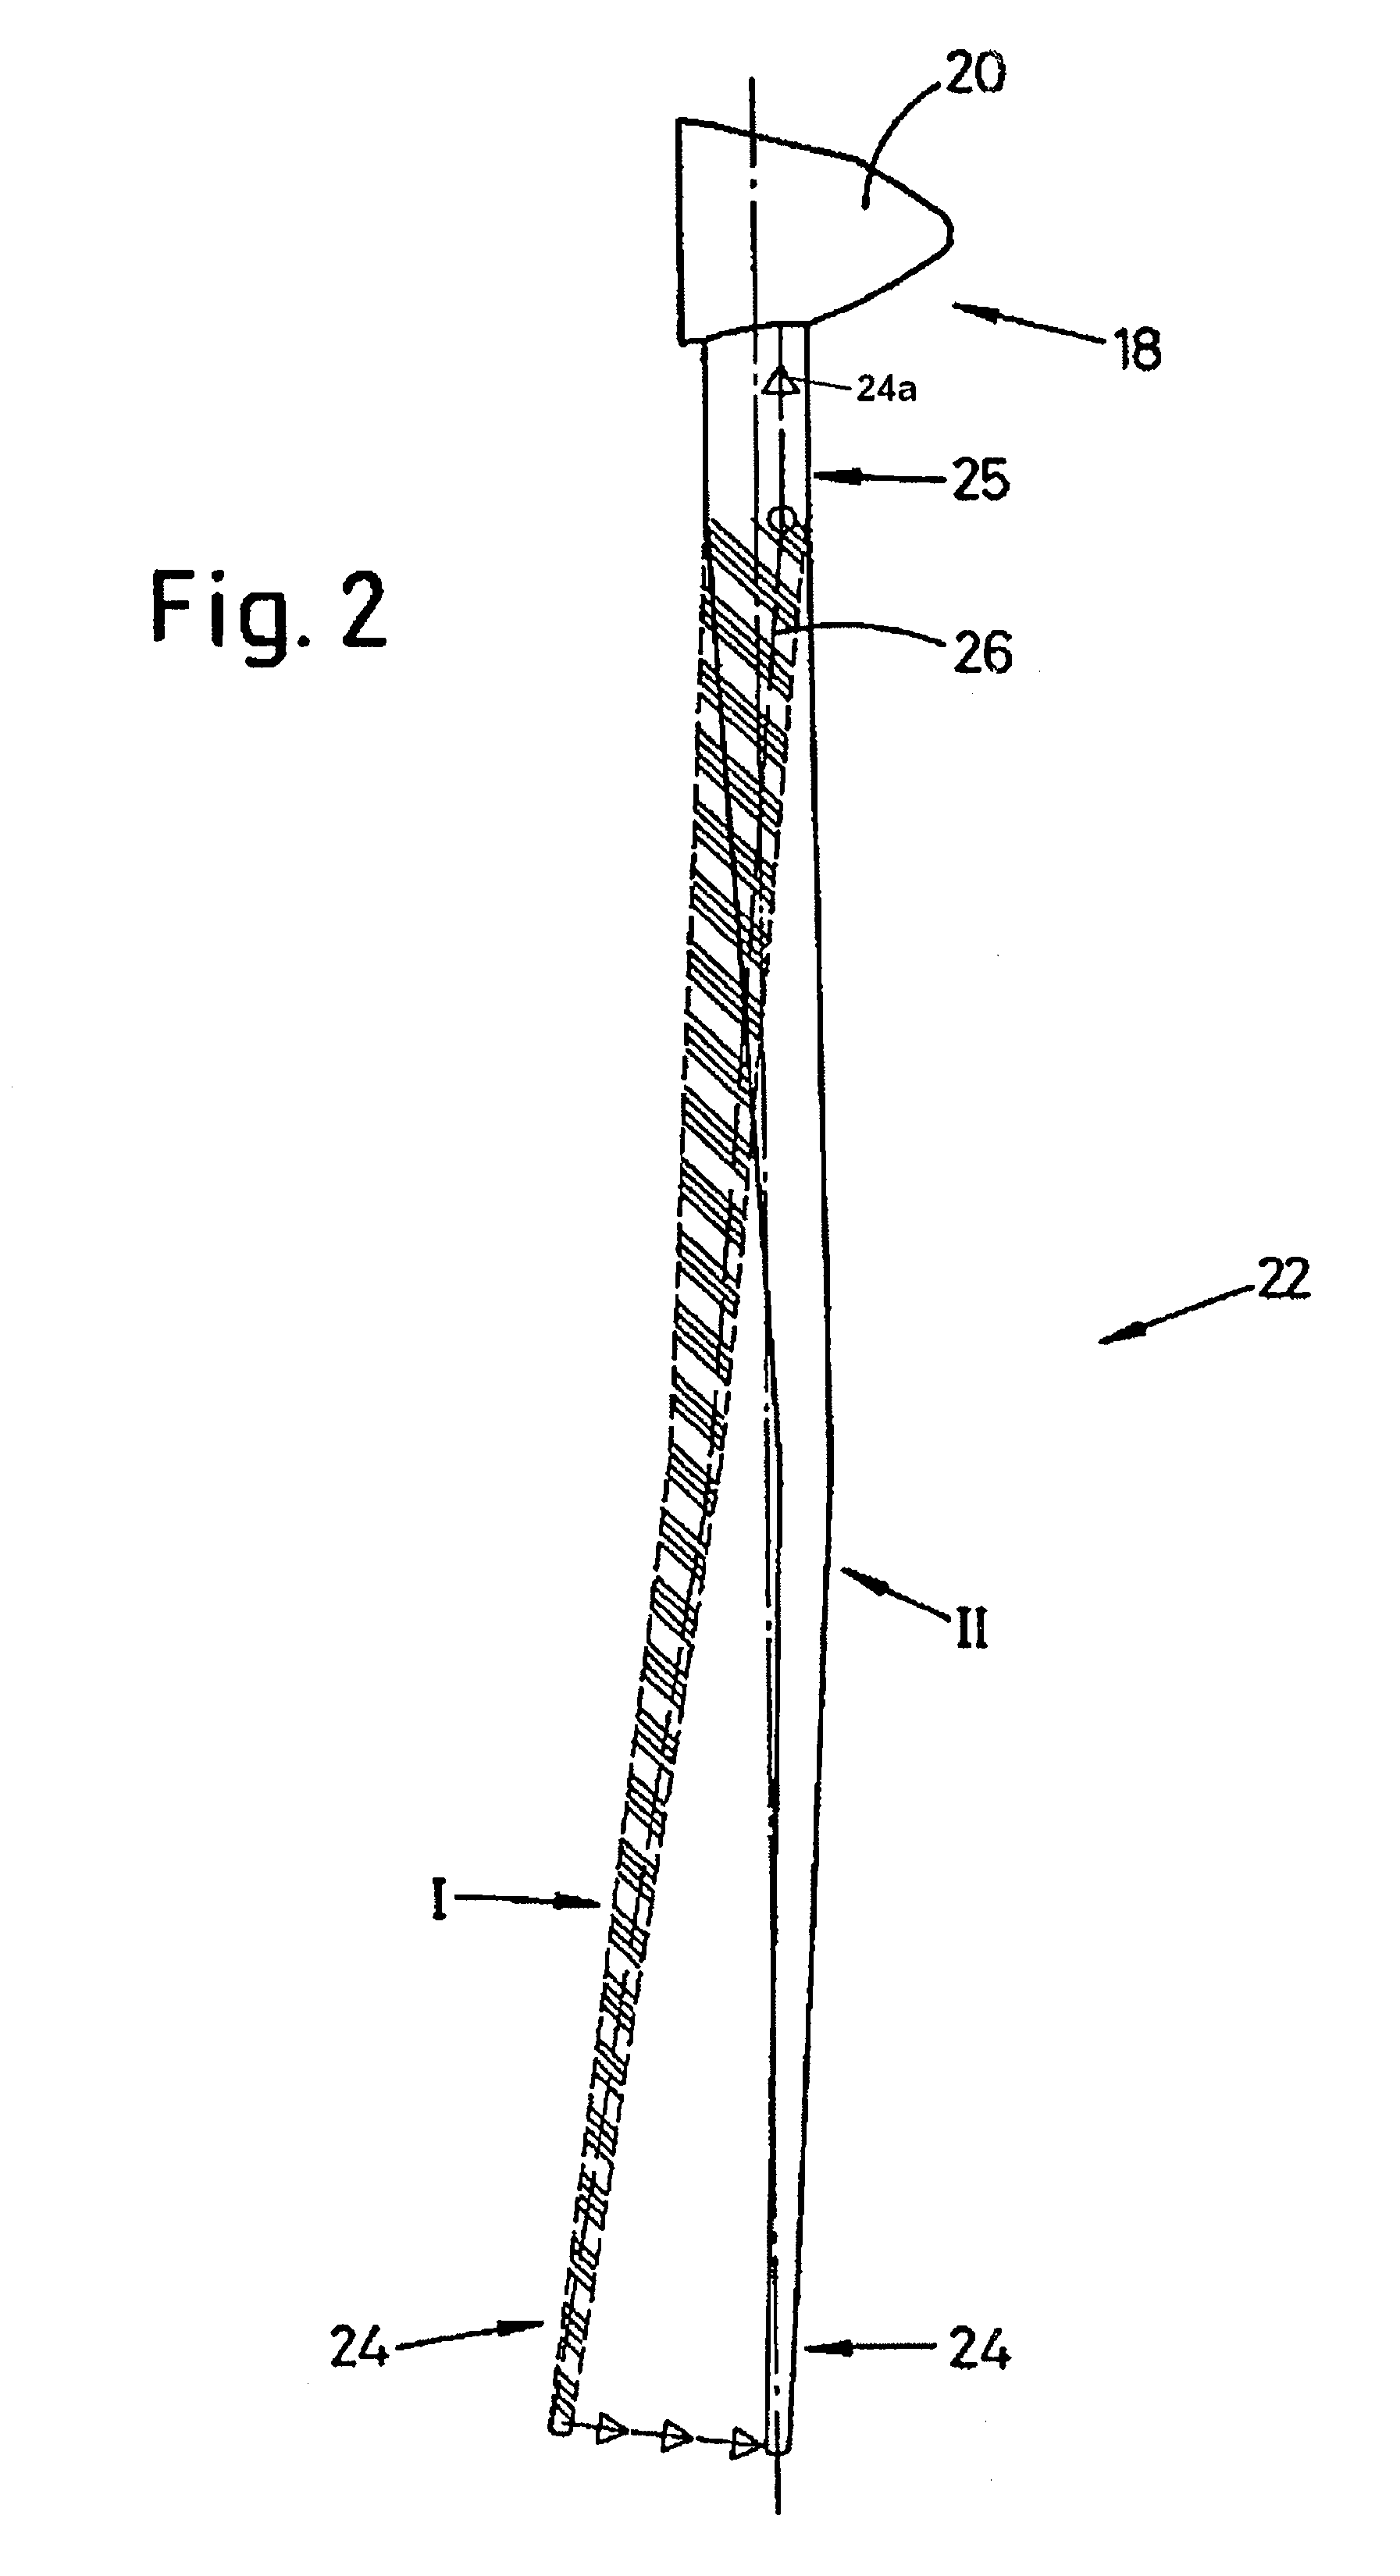 Method for operating a wind power plant